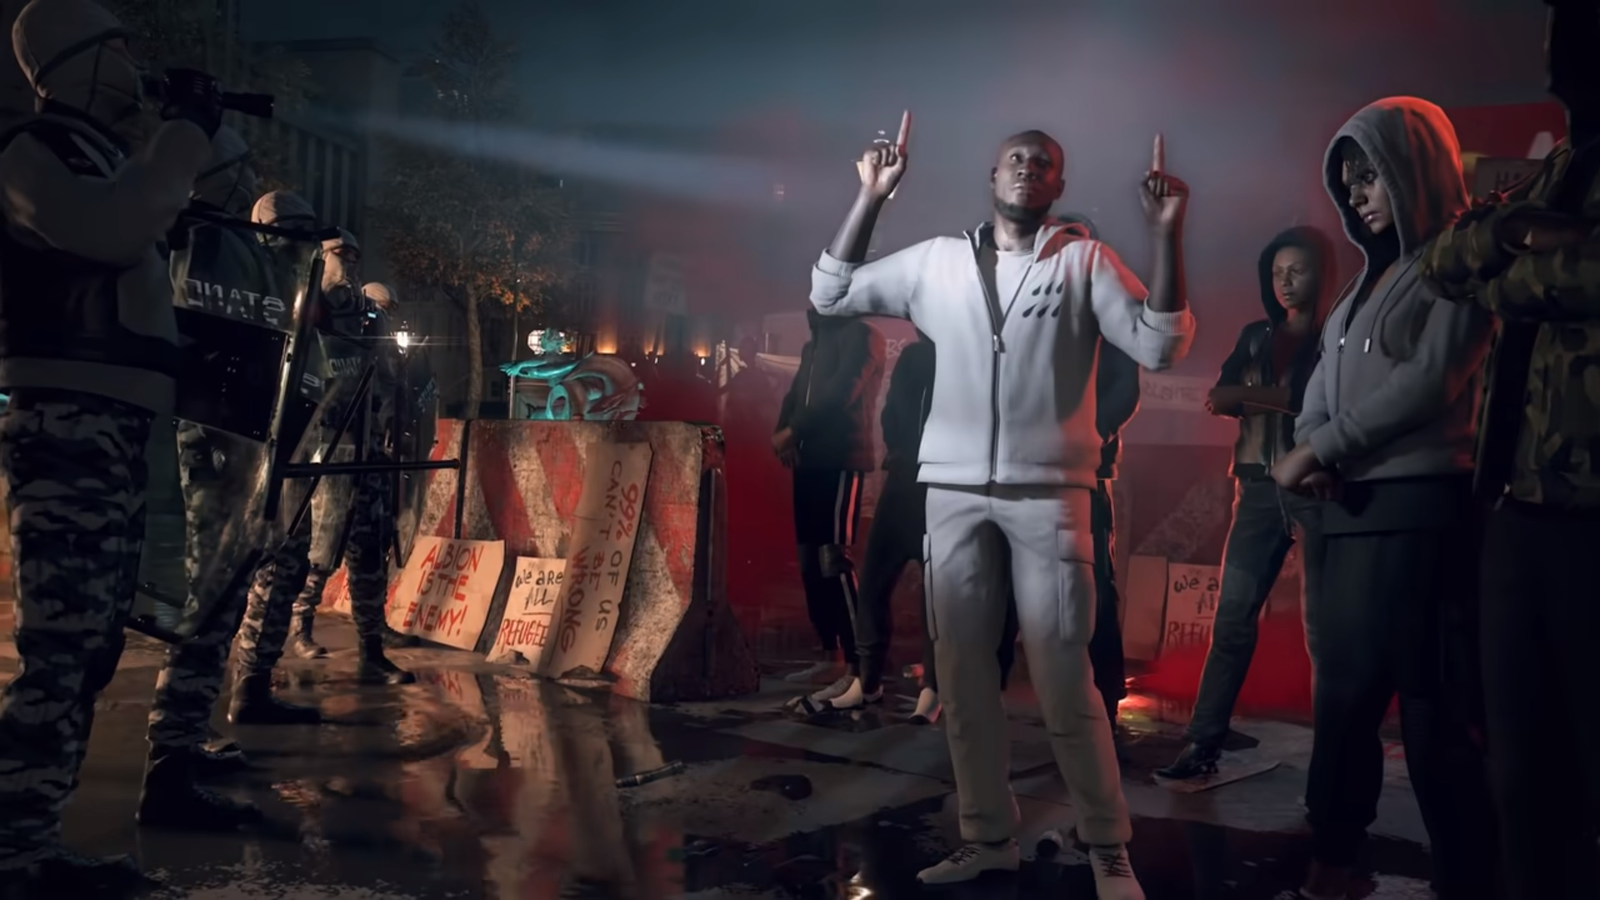 Watch Dogs: Legion features Aiden Pearce and Stormzy